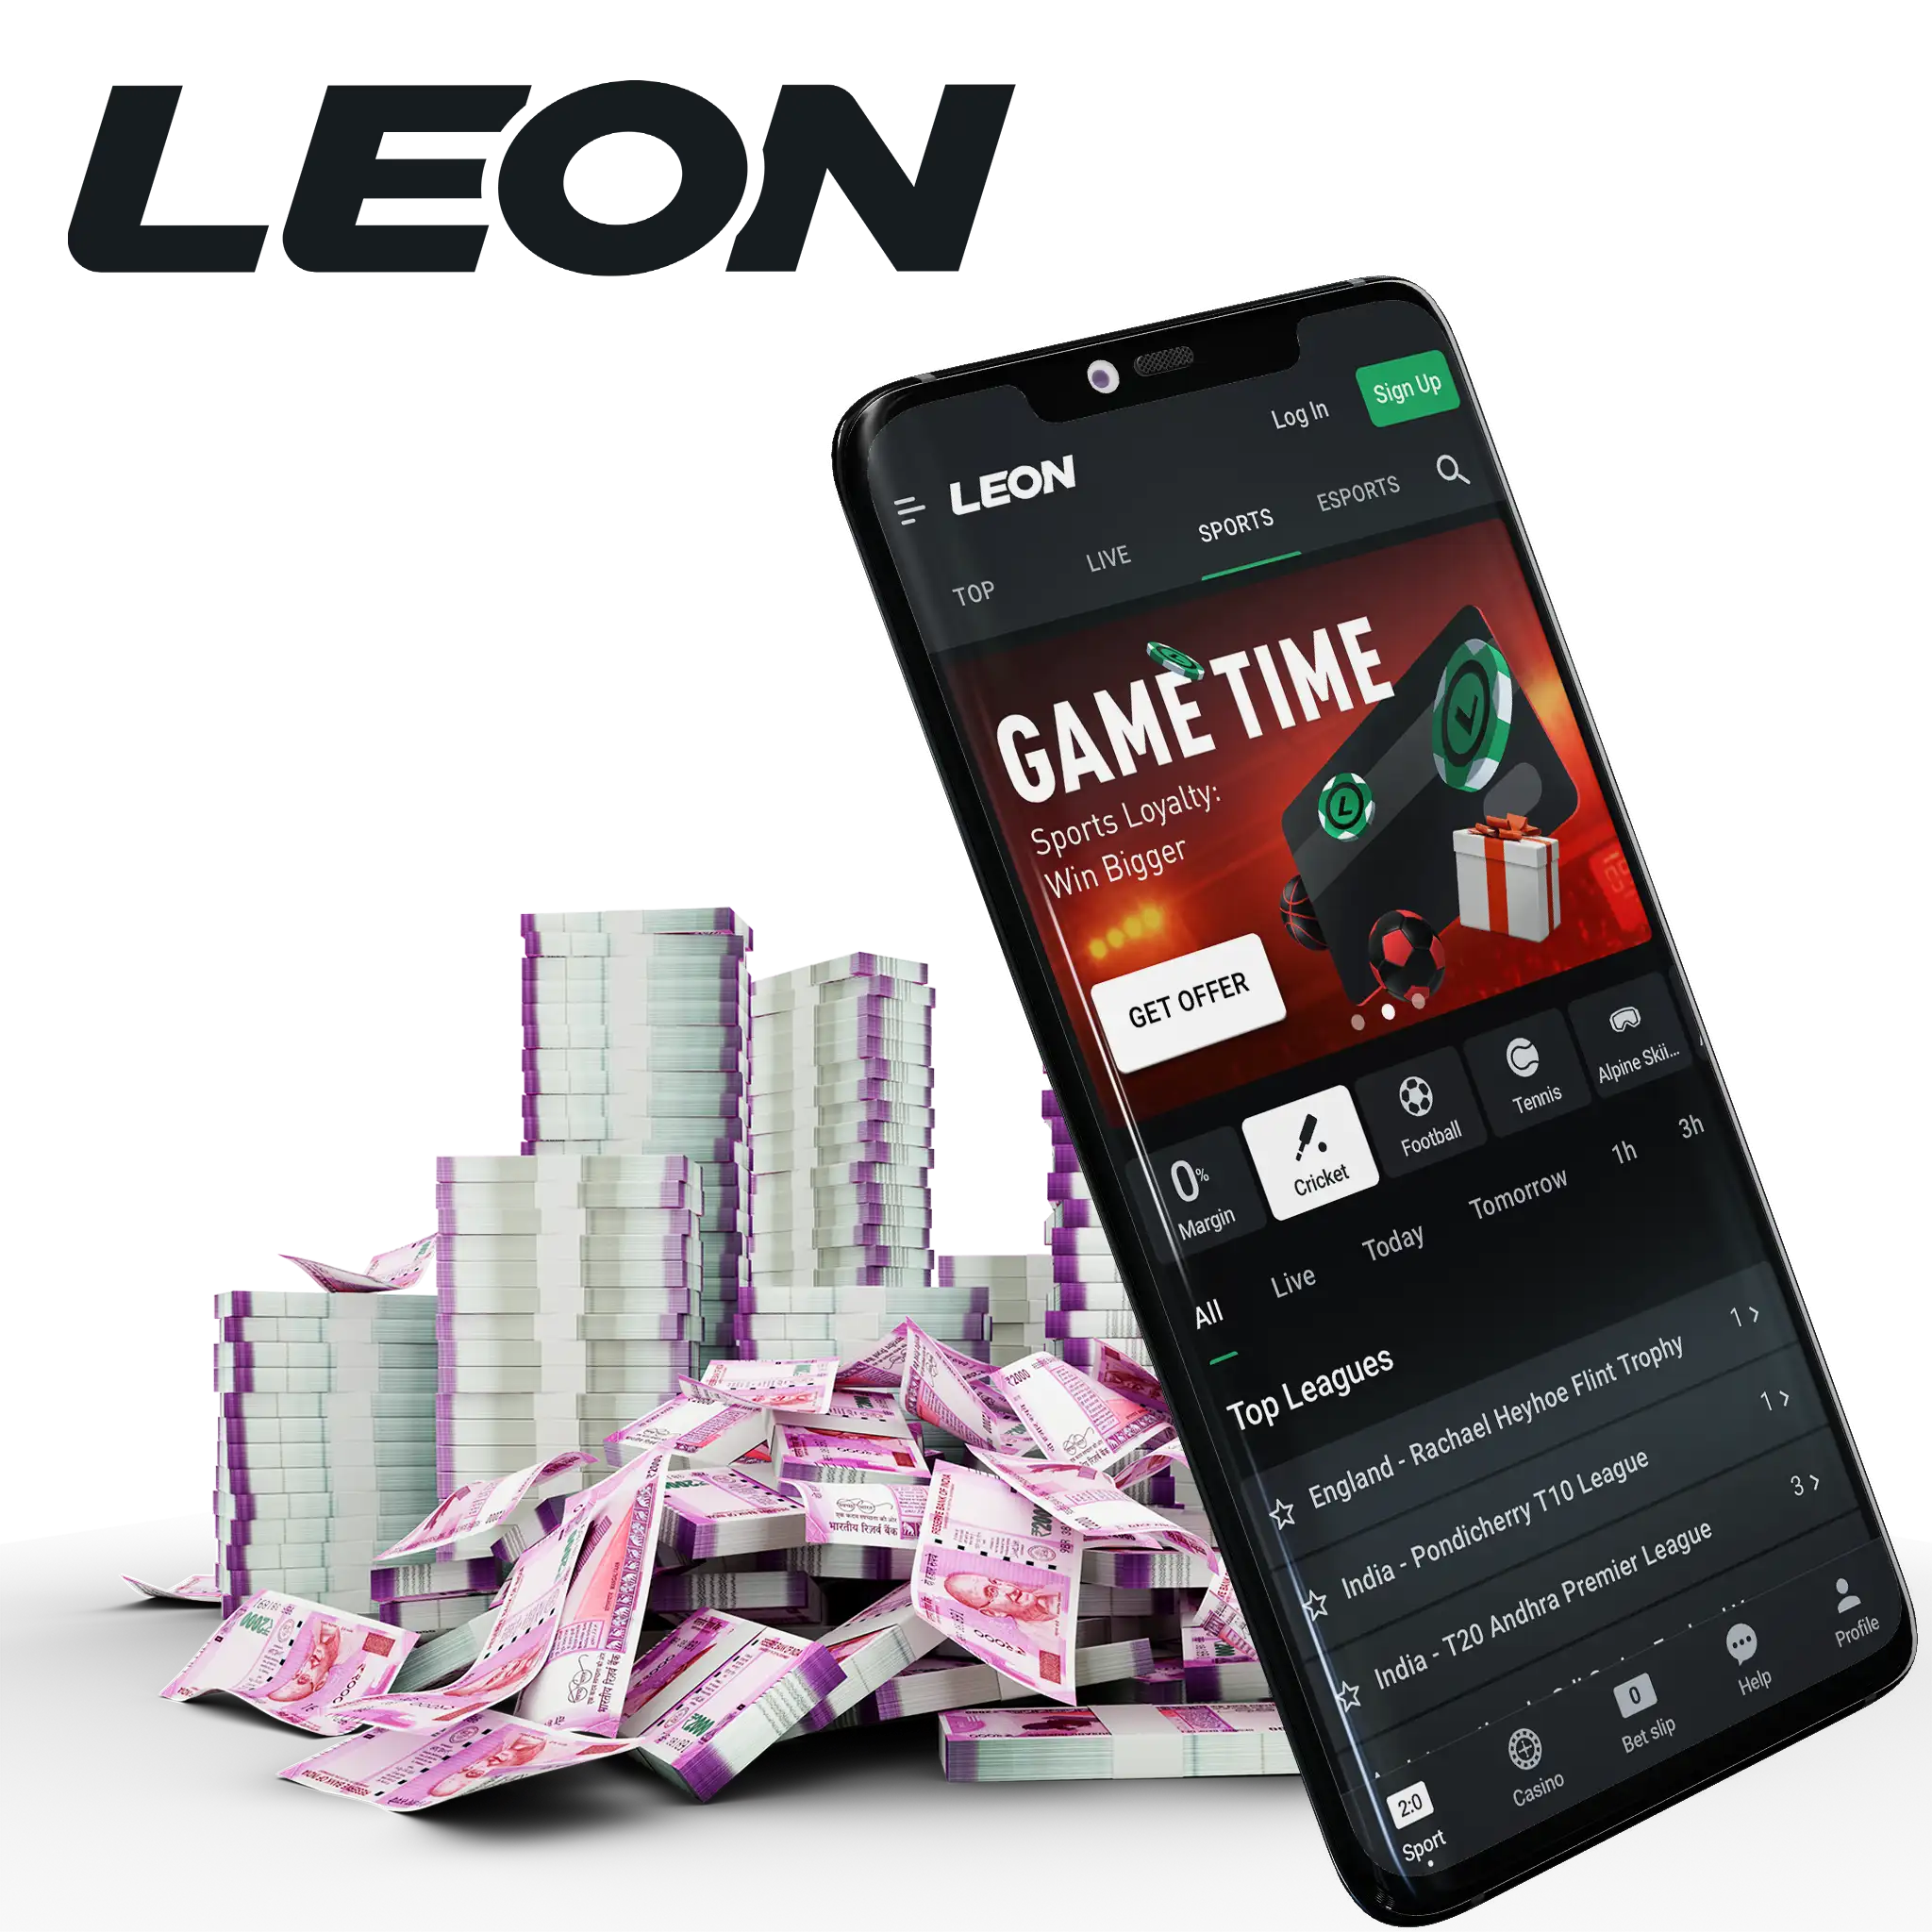 Leonbet App is compatible with all modern mobile devices.